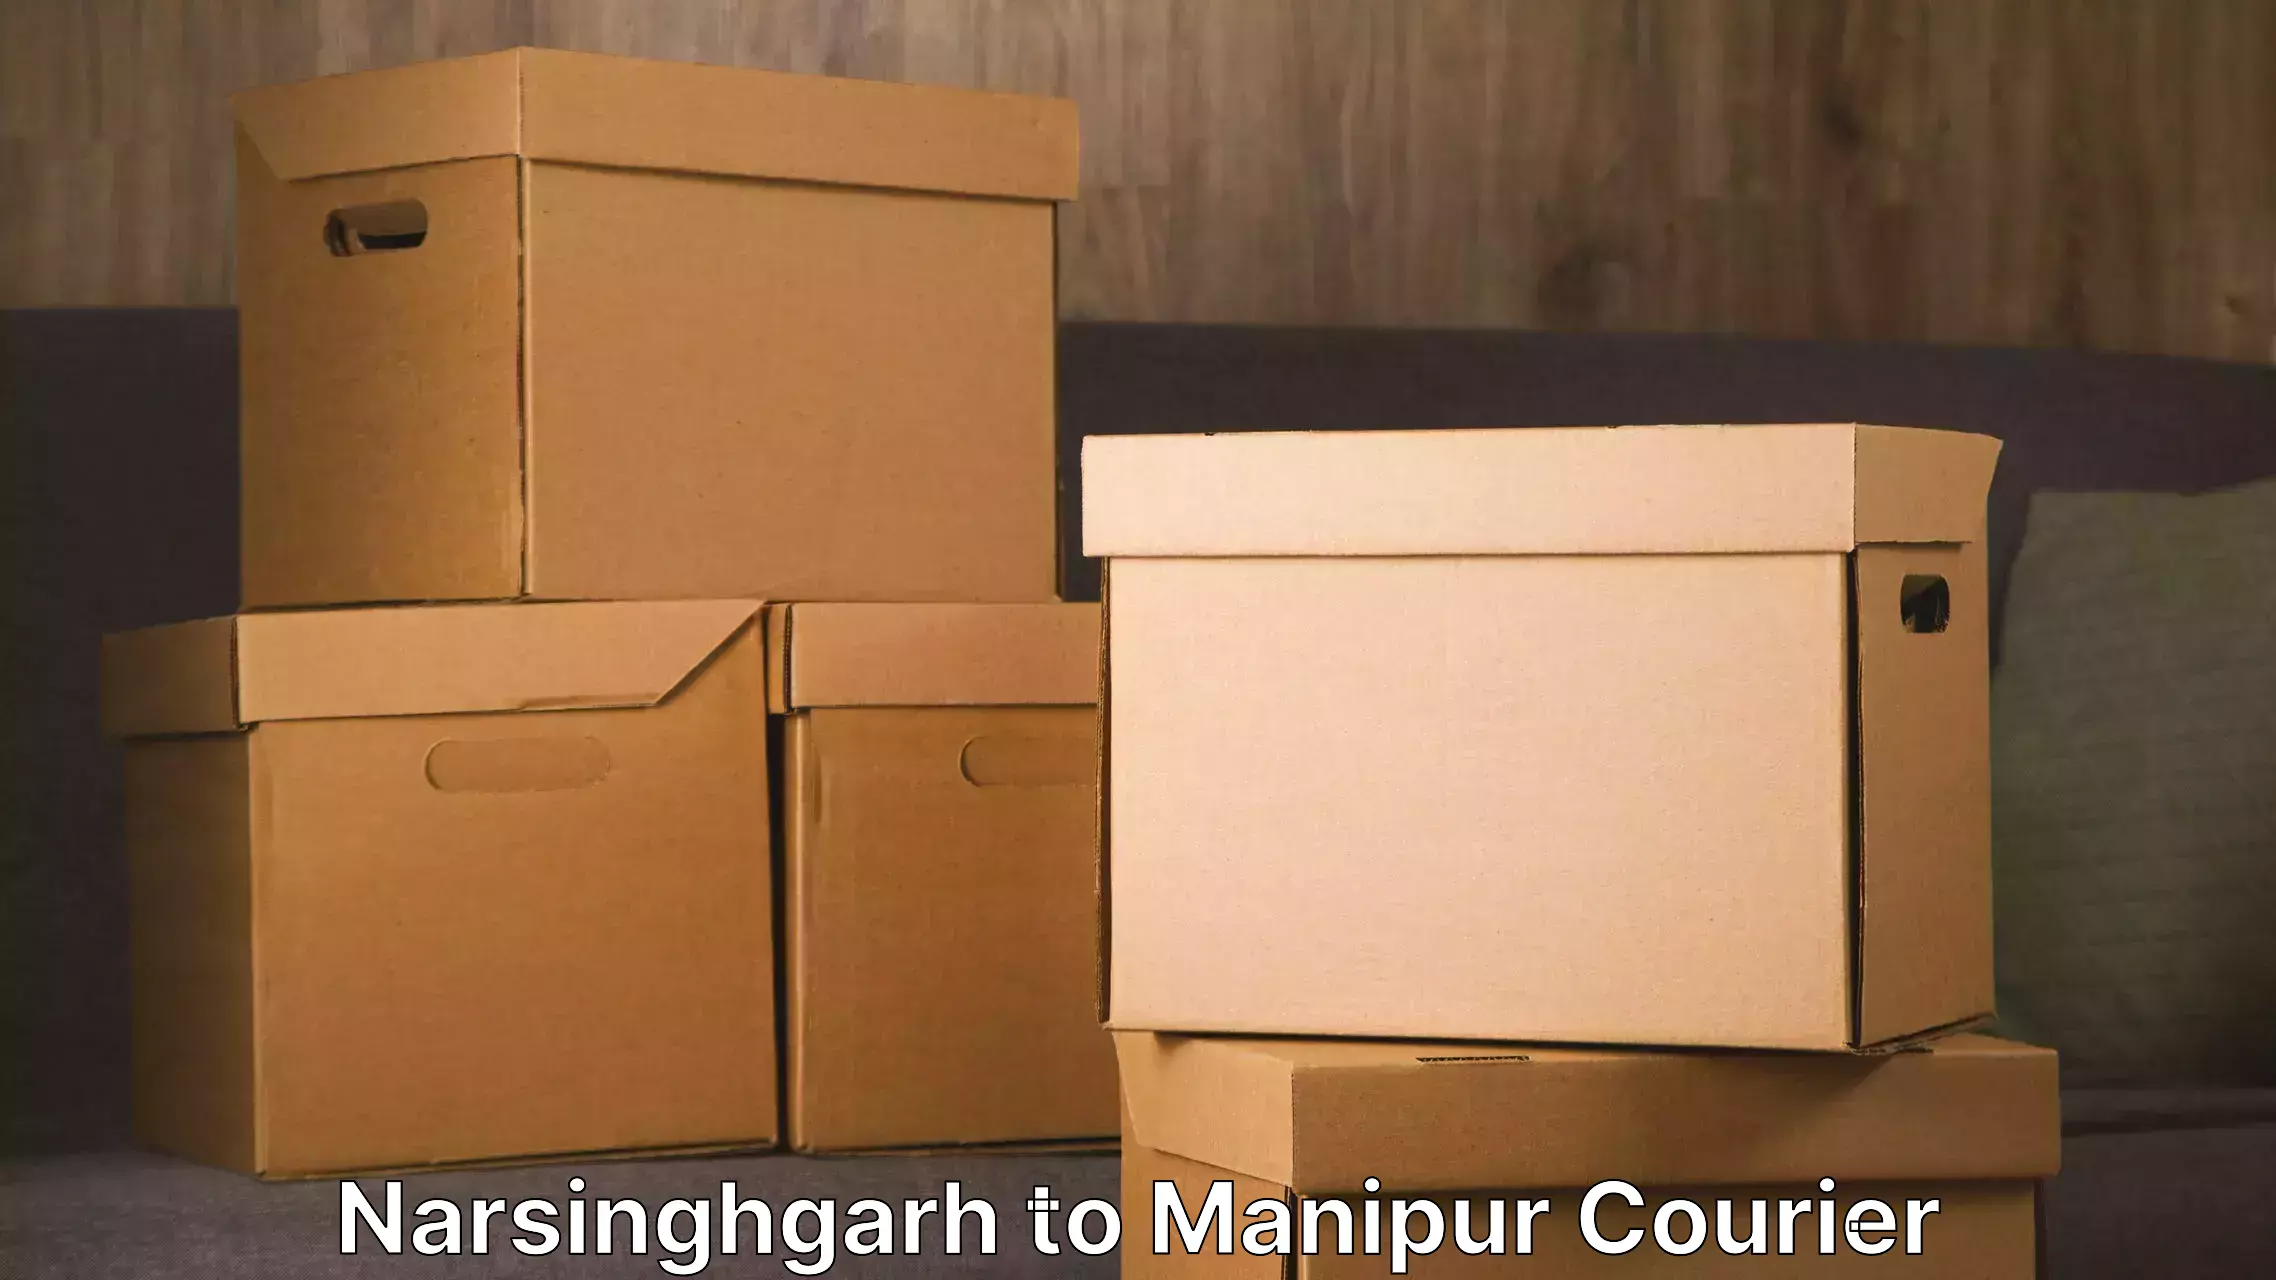 Furniture delivery service Narsinghgarh to Tamenglong